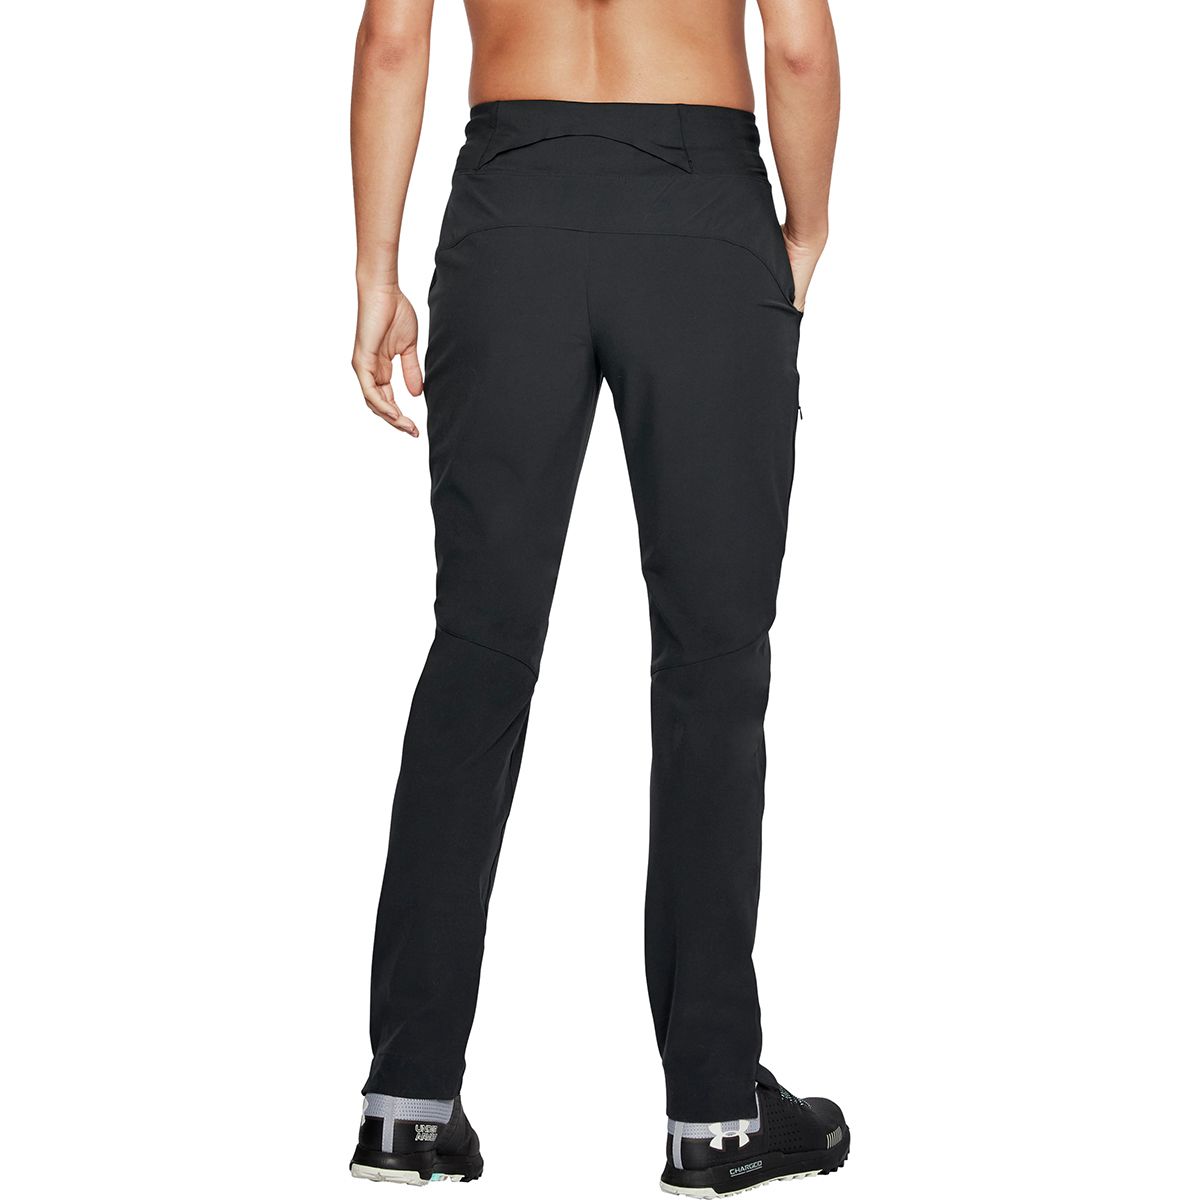 Under Armour Ramble Hike Pant - Women's - Clothing